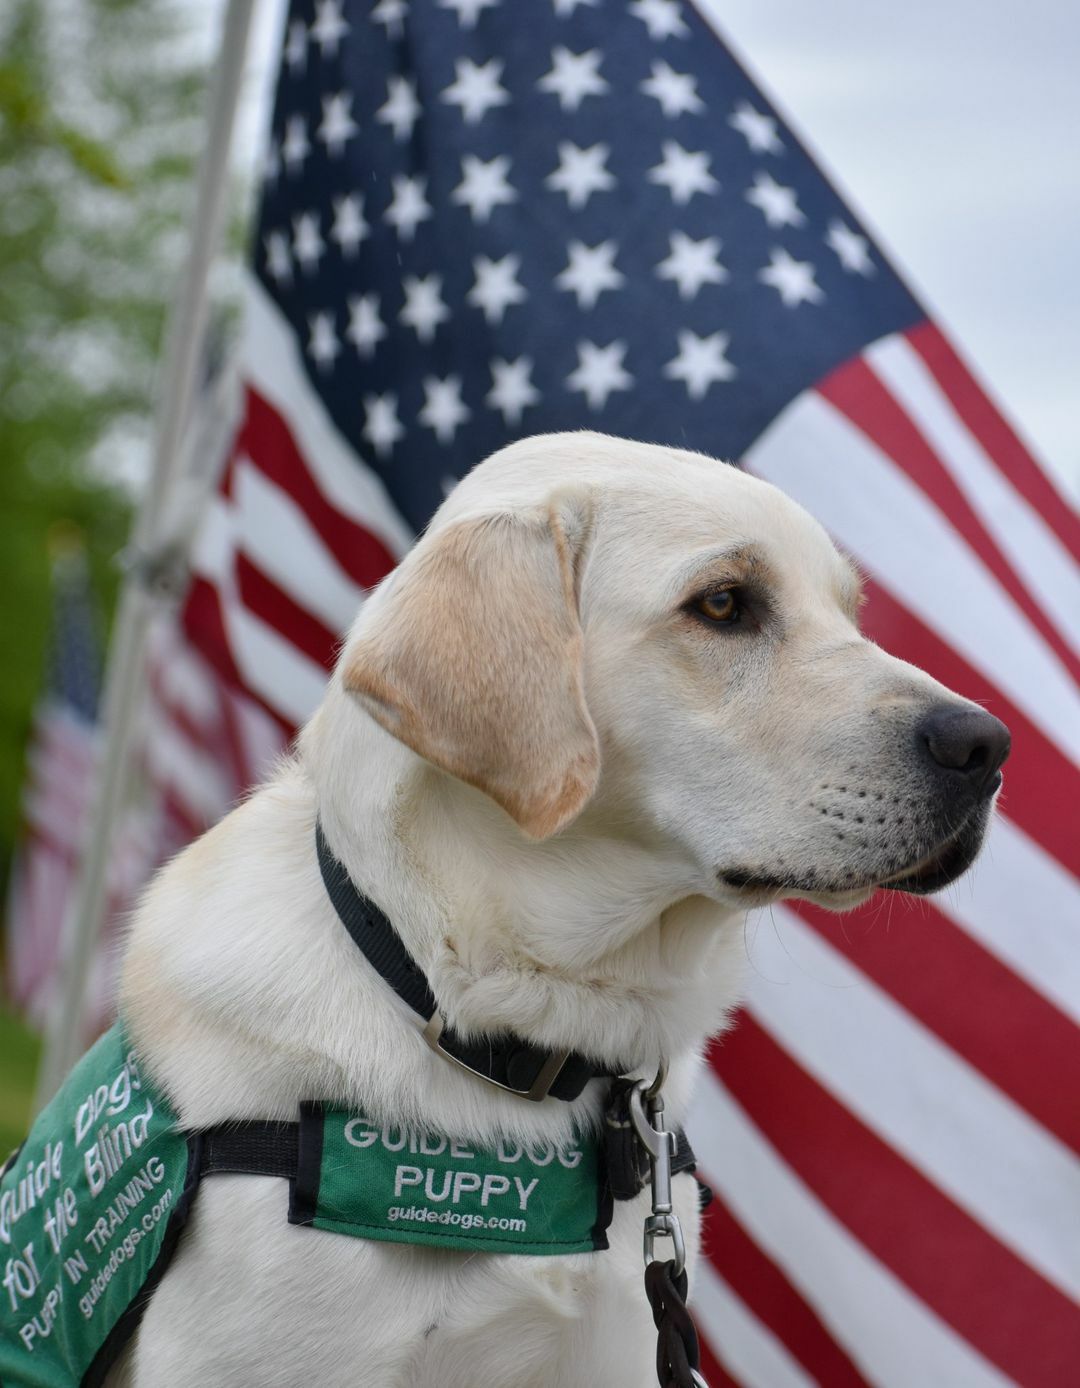 A yellow Lab guide dog puppy sits with a series look on their face. The American flag waves gently behind them.